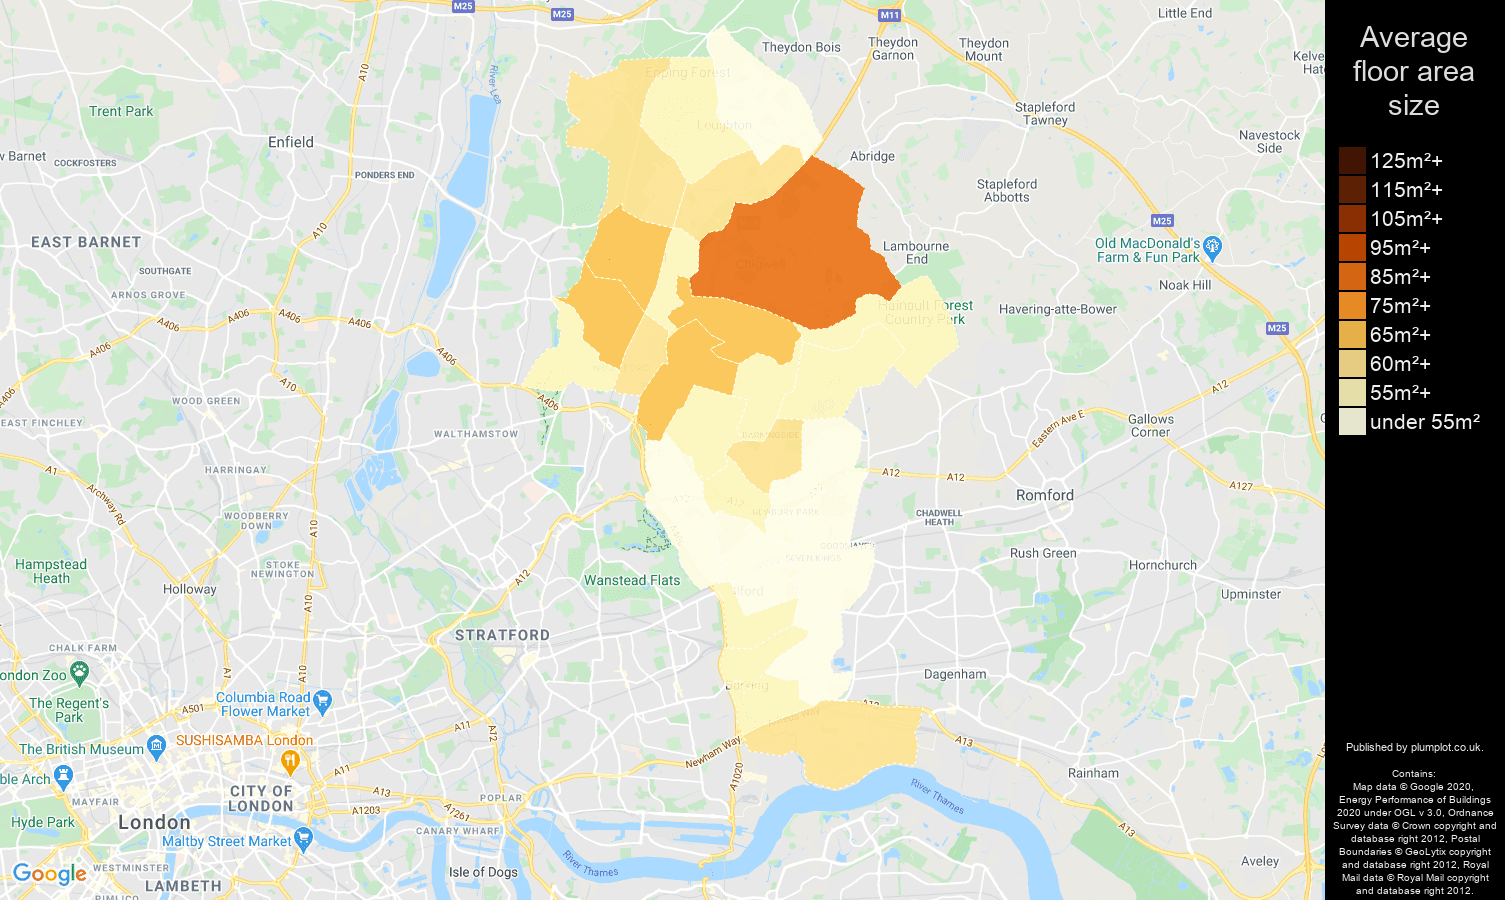 Ilford map of average floor area size of flats